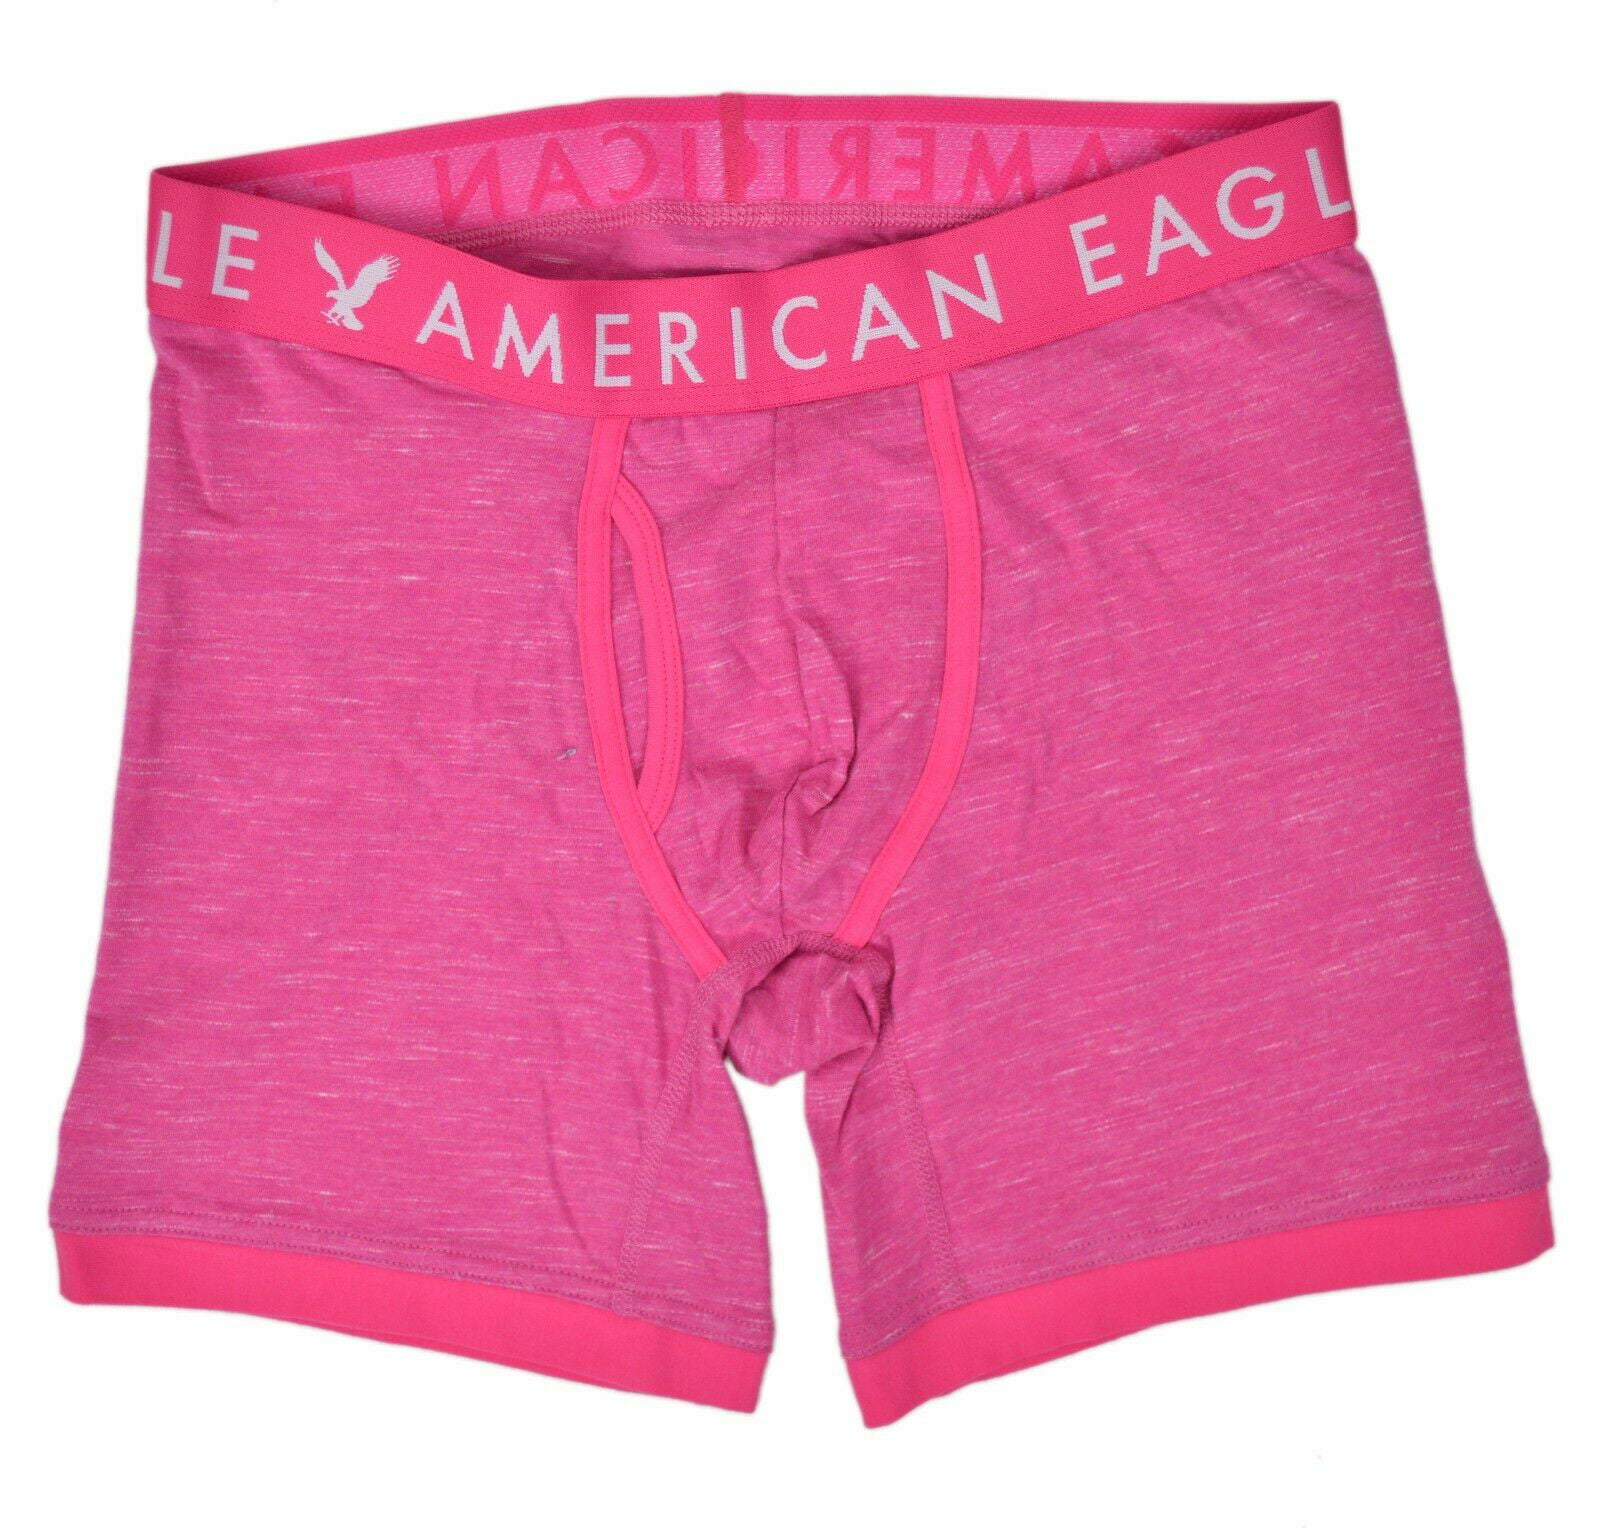 New American Eagle Men's Pink 6 Regular Fit Classic Boxer Brief, Size S,  8810-4